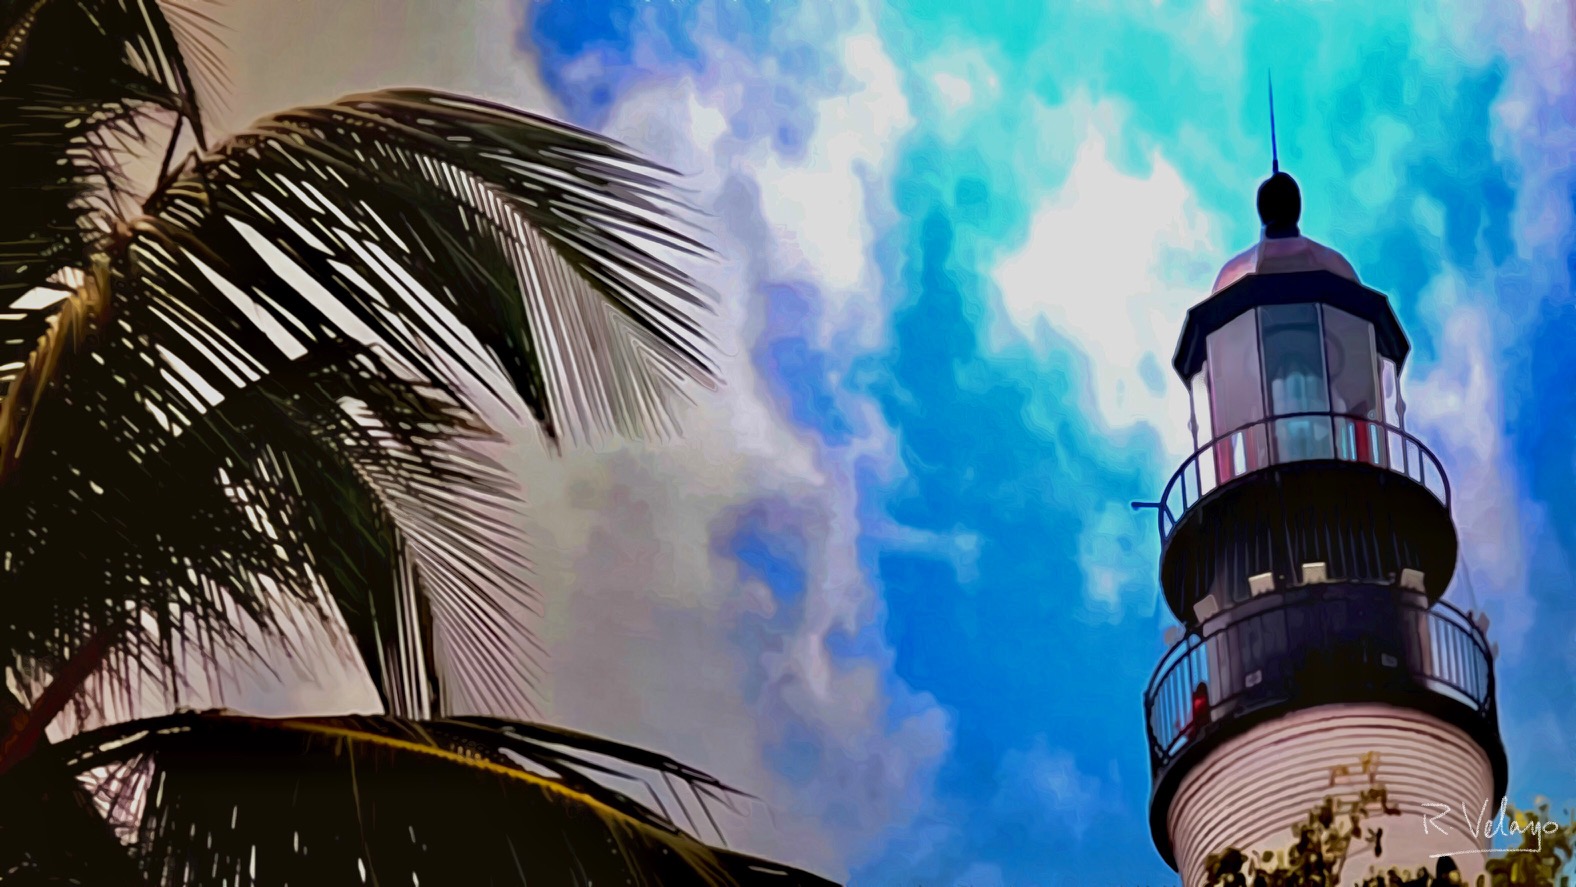 "LOOKING UP AT THE KEY WEST LIGHTHOUSE" [Created: 2/02/2022]